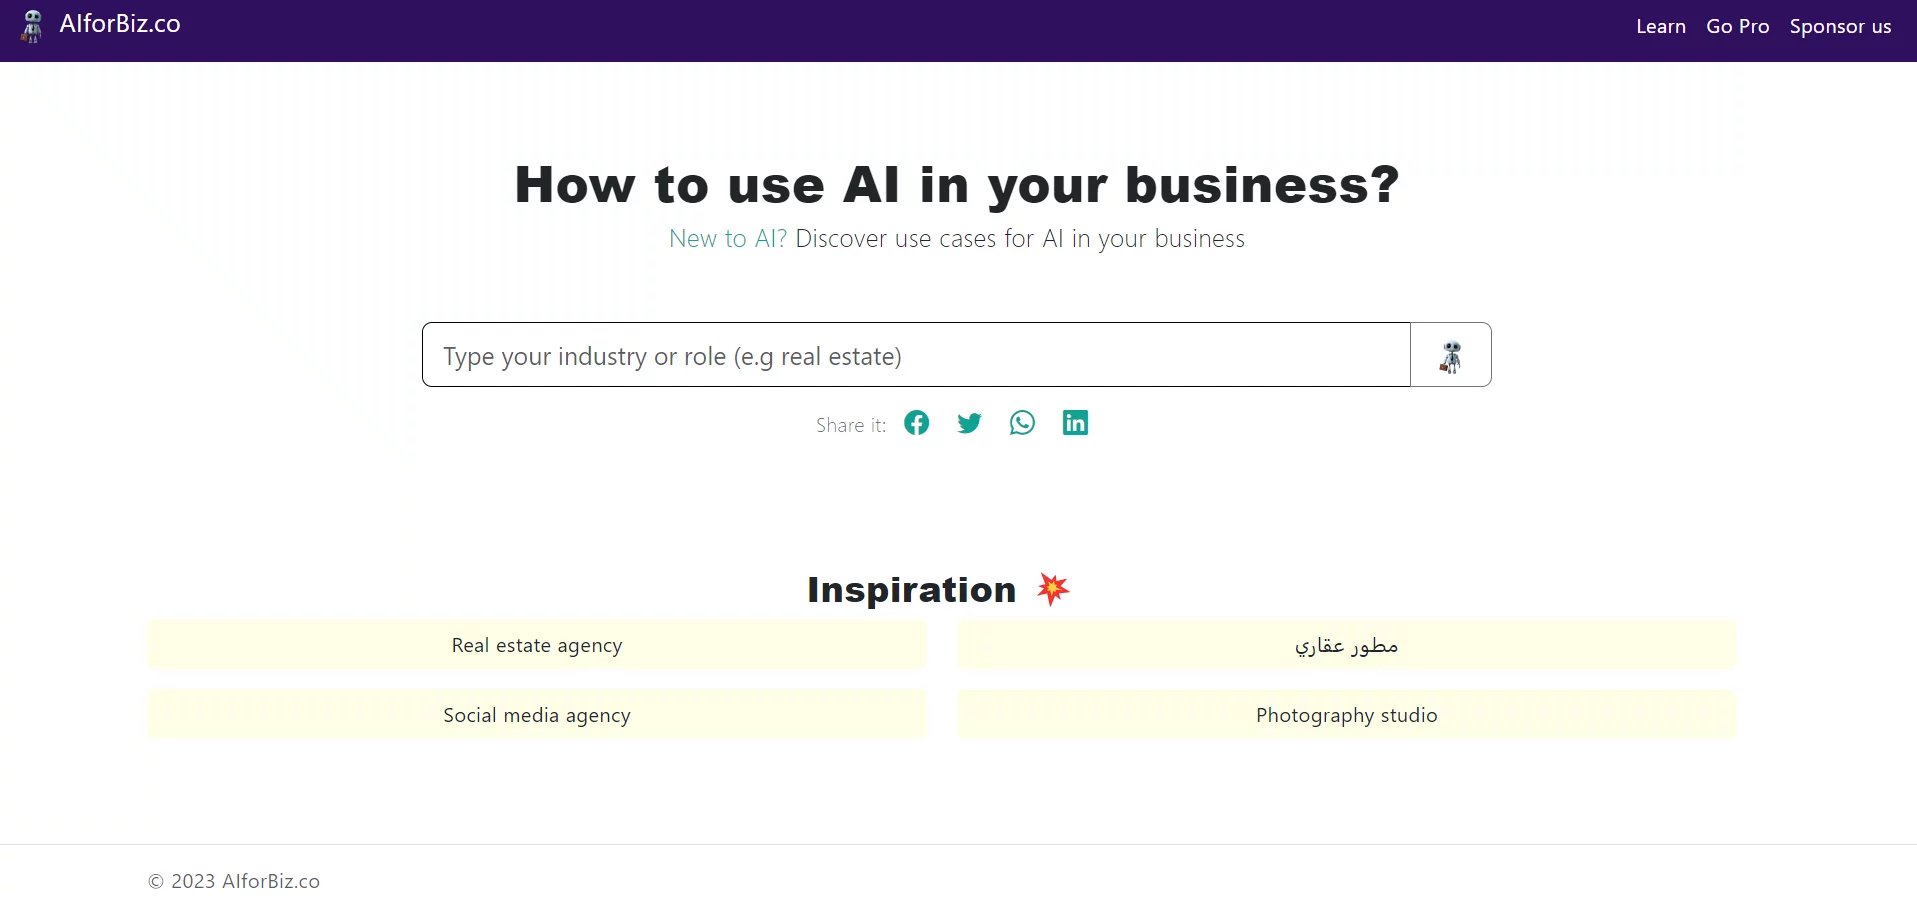  Get Inspiration to integrate AI into your